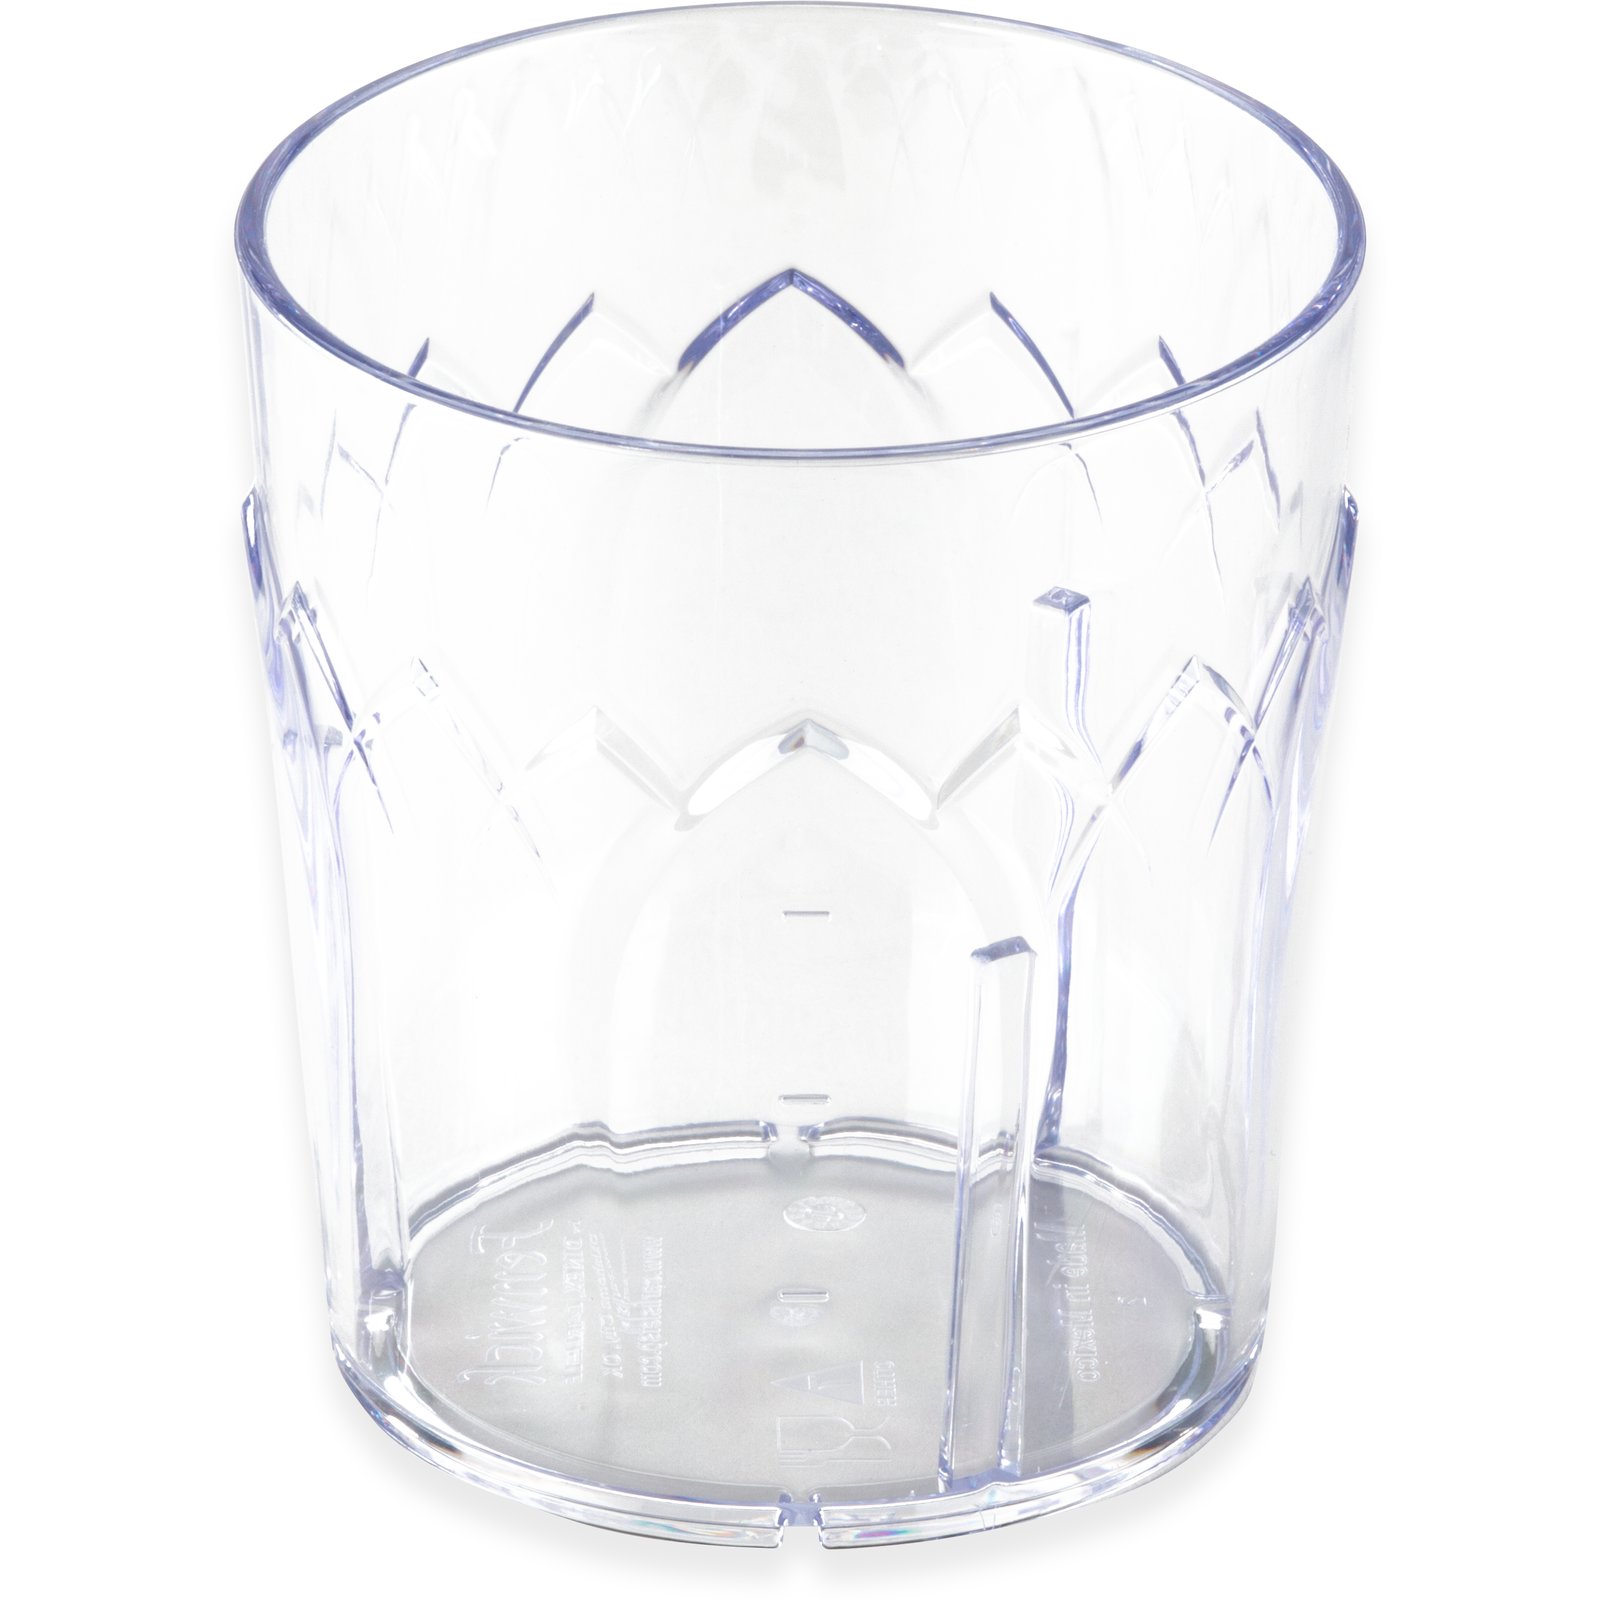 Clear Plastic Cups, 9oz, 72ct